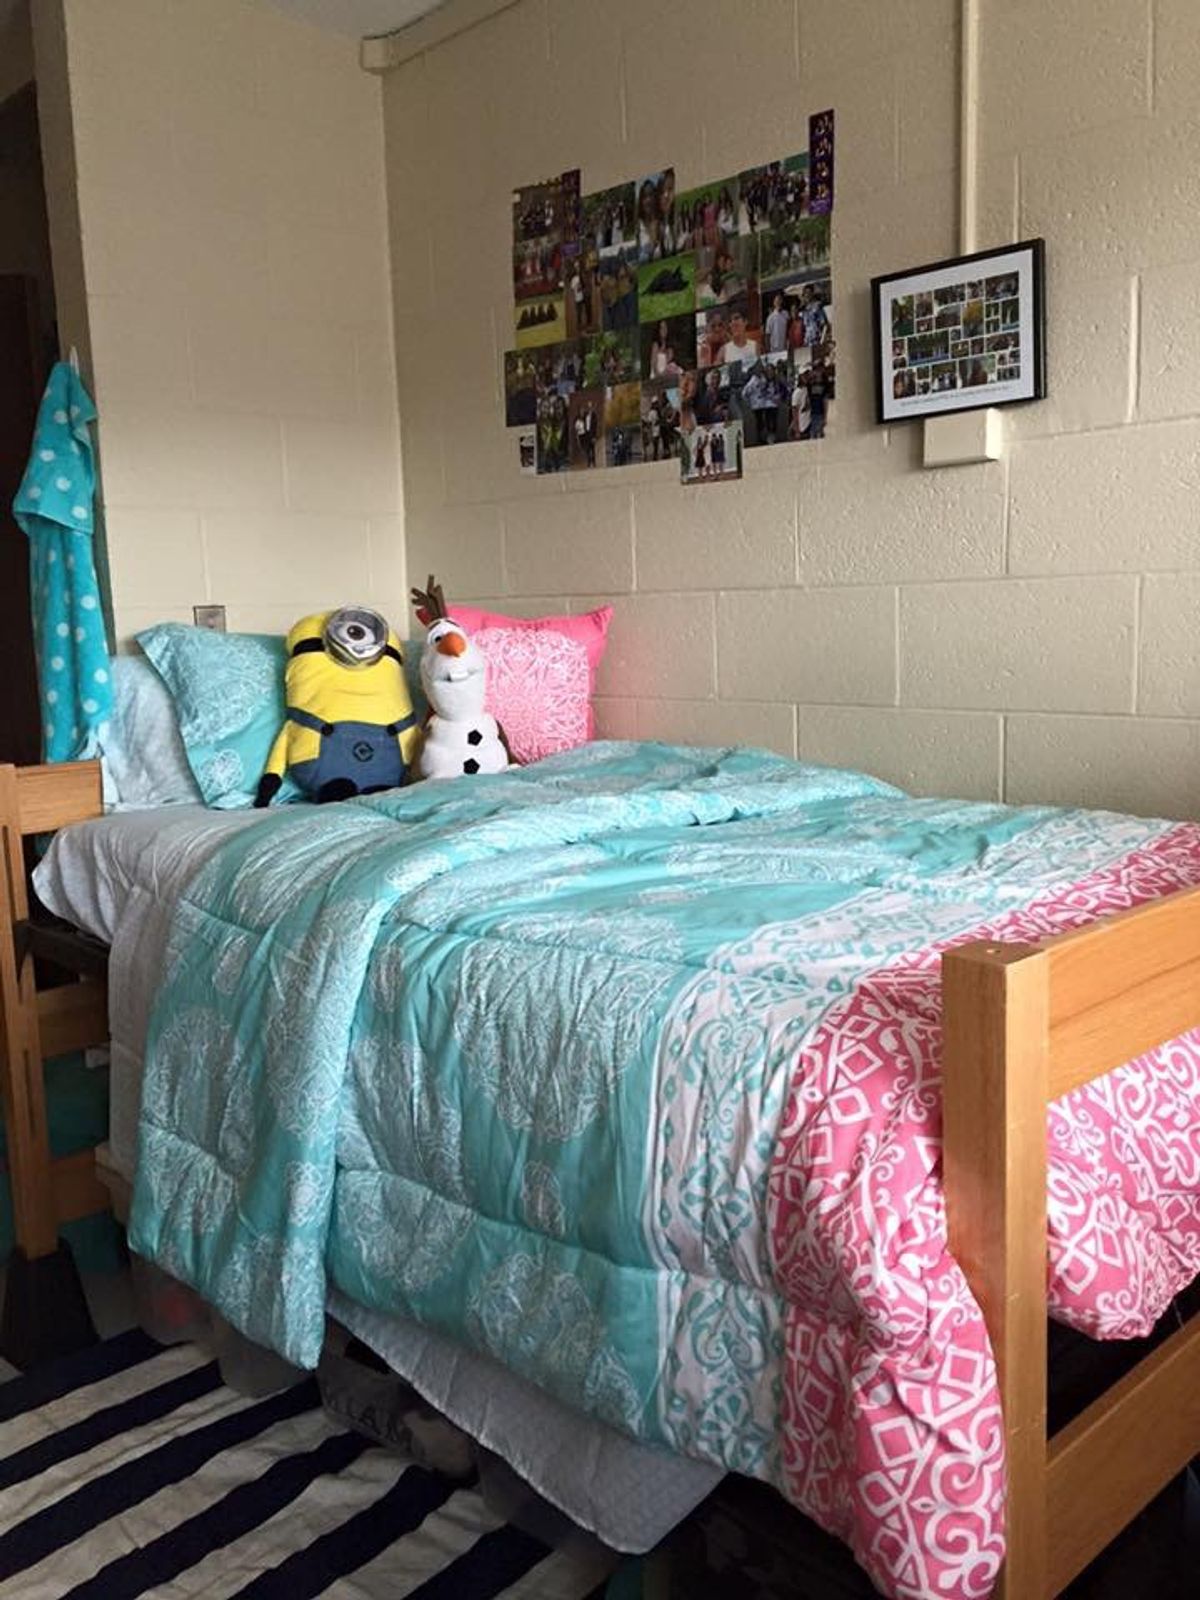 An Open Letter To The Girl Moving Into My Old Room